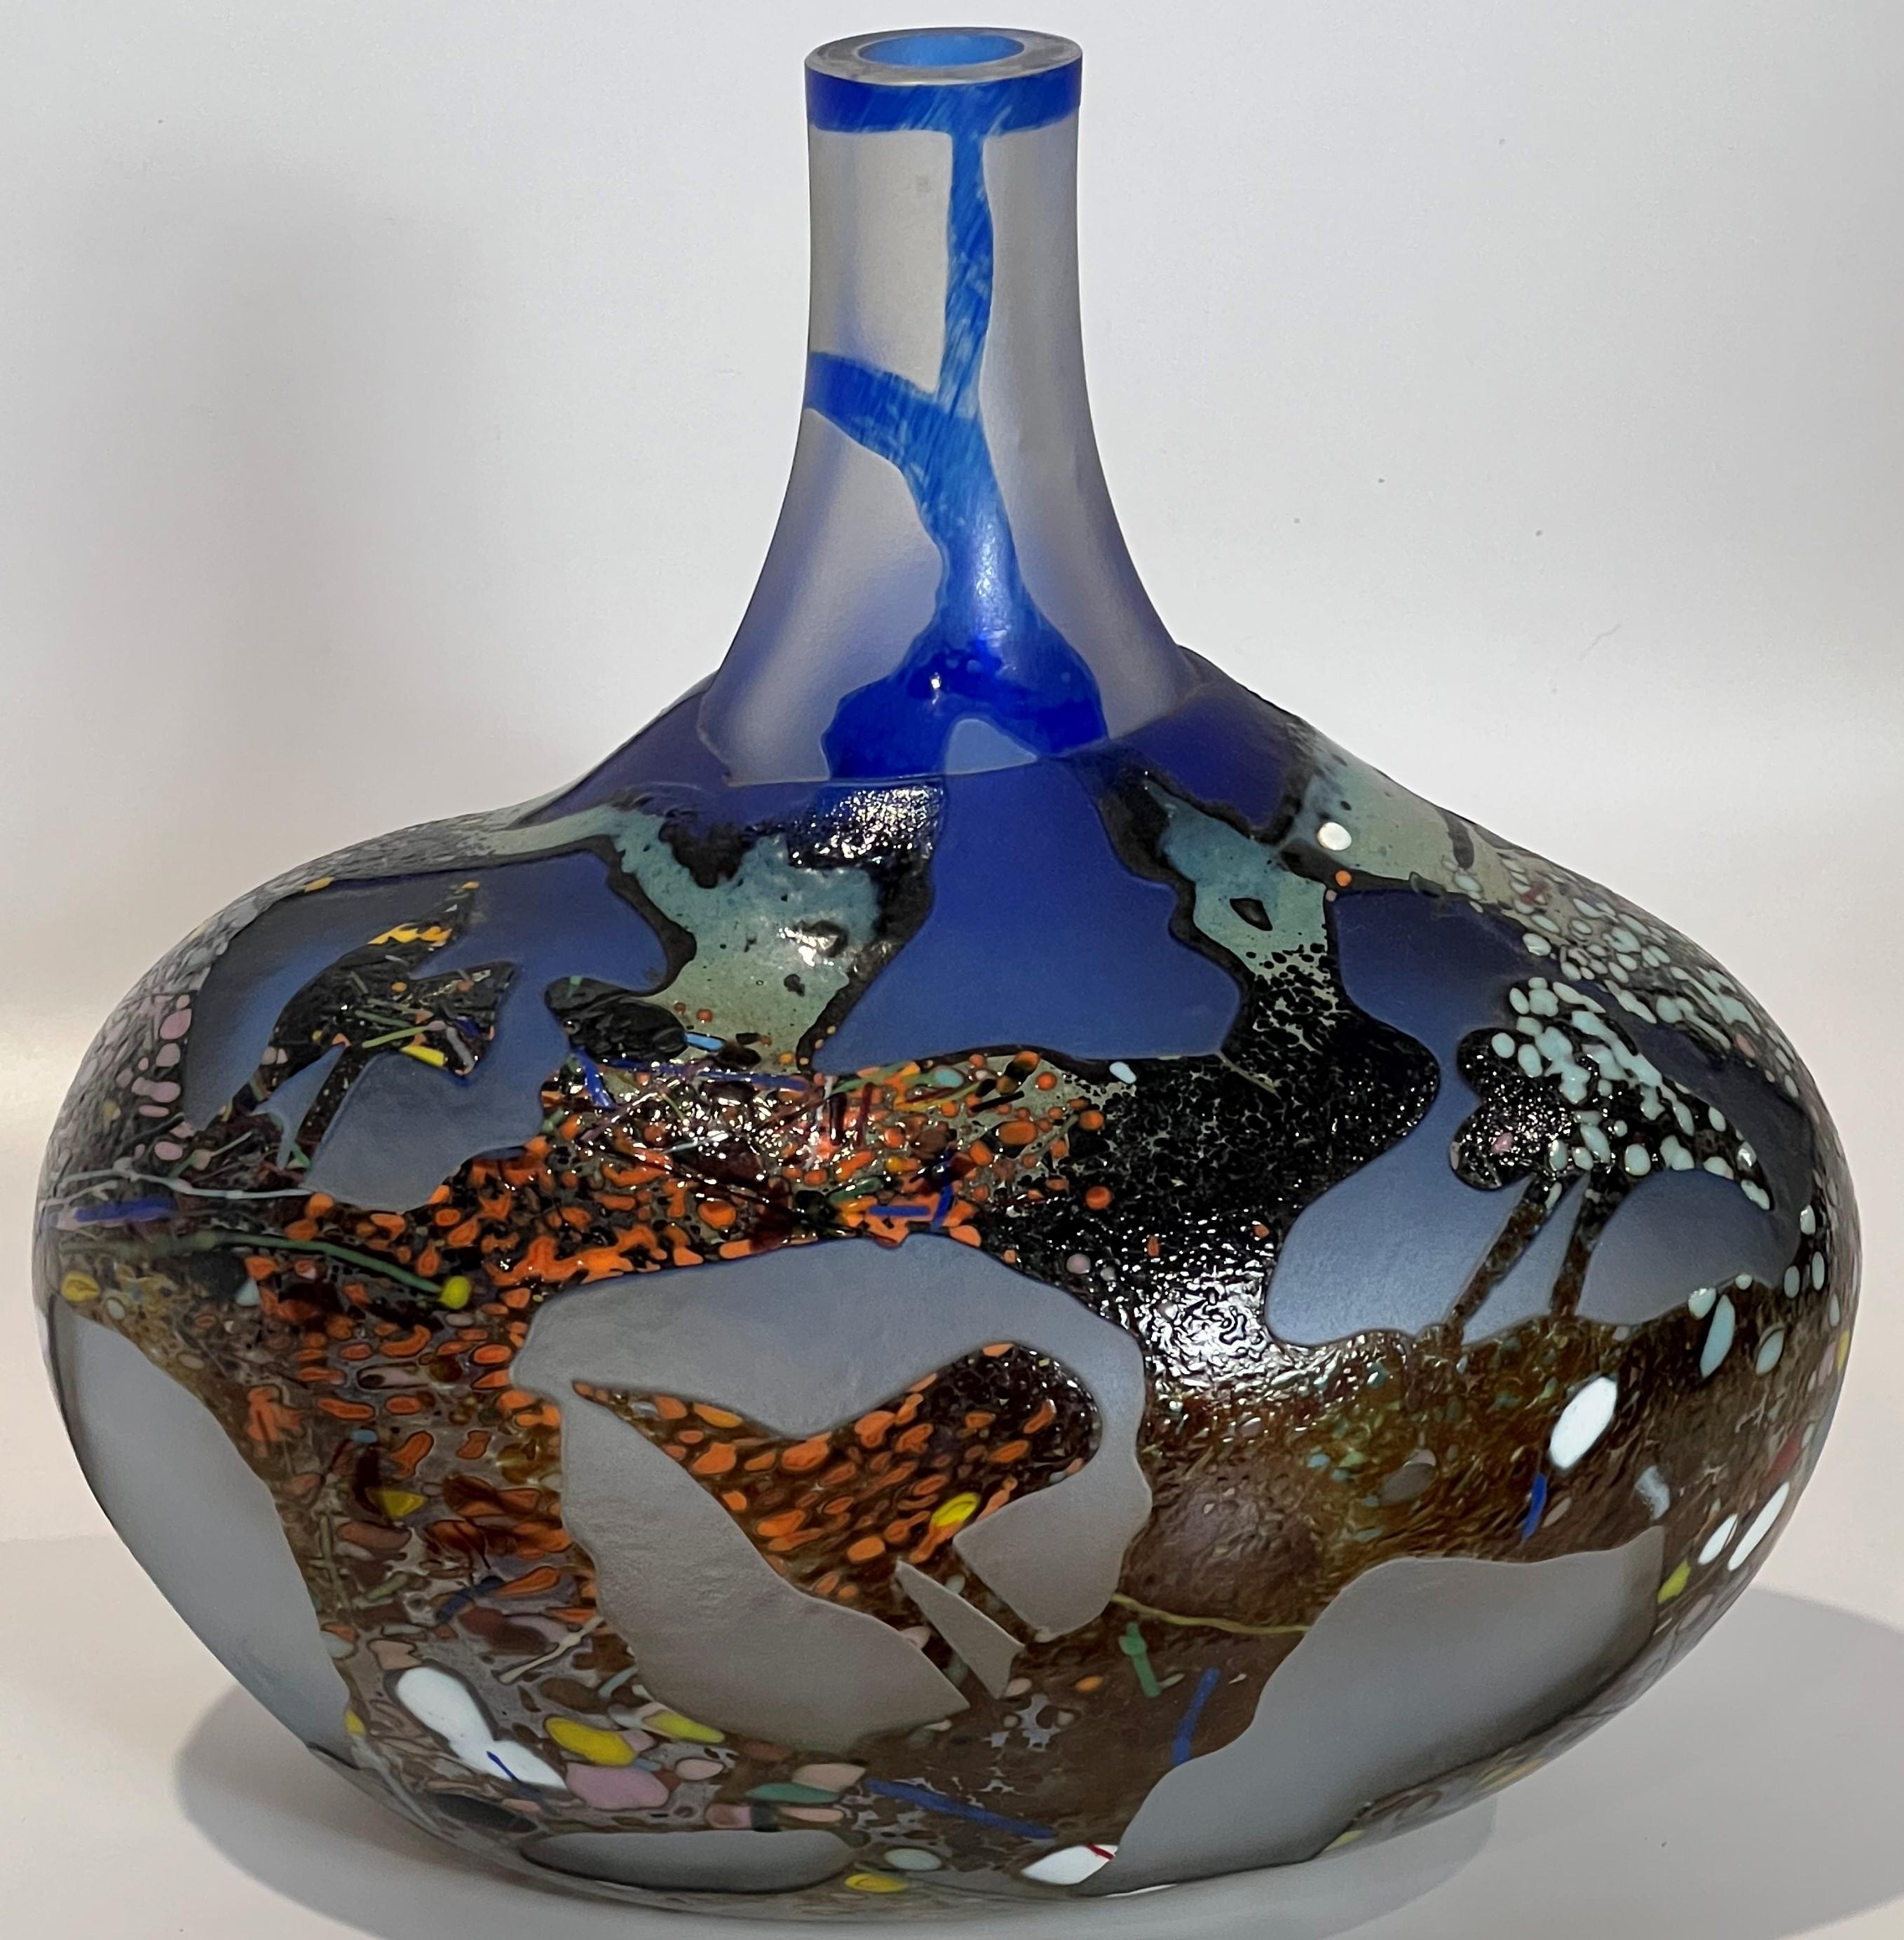 Bertil's work is often haunting, but this bottle vase is ready for display or perhaps for the most adventurous as a container for your personal witch's brew. A entire layer of end of day type scattered glass has been cameo acid cut back to reveal a